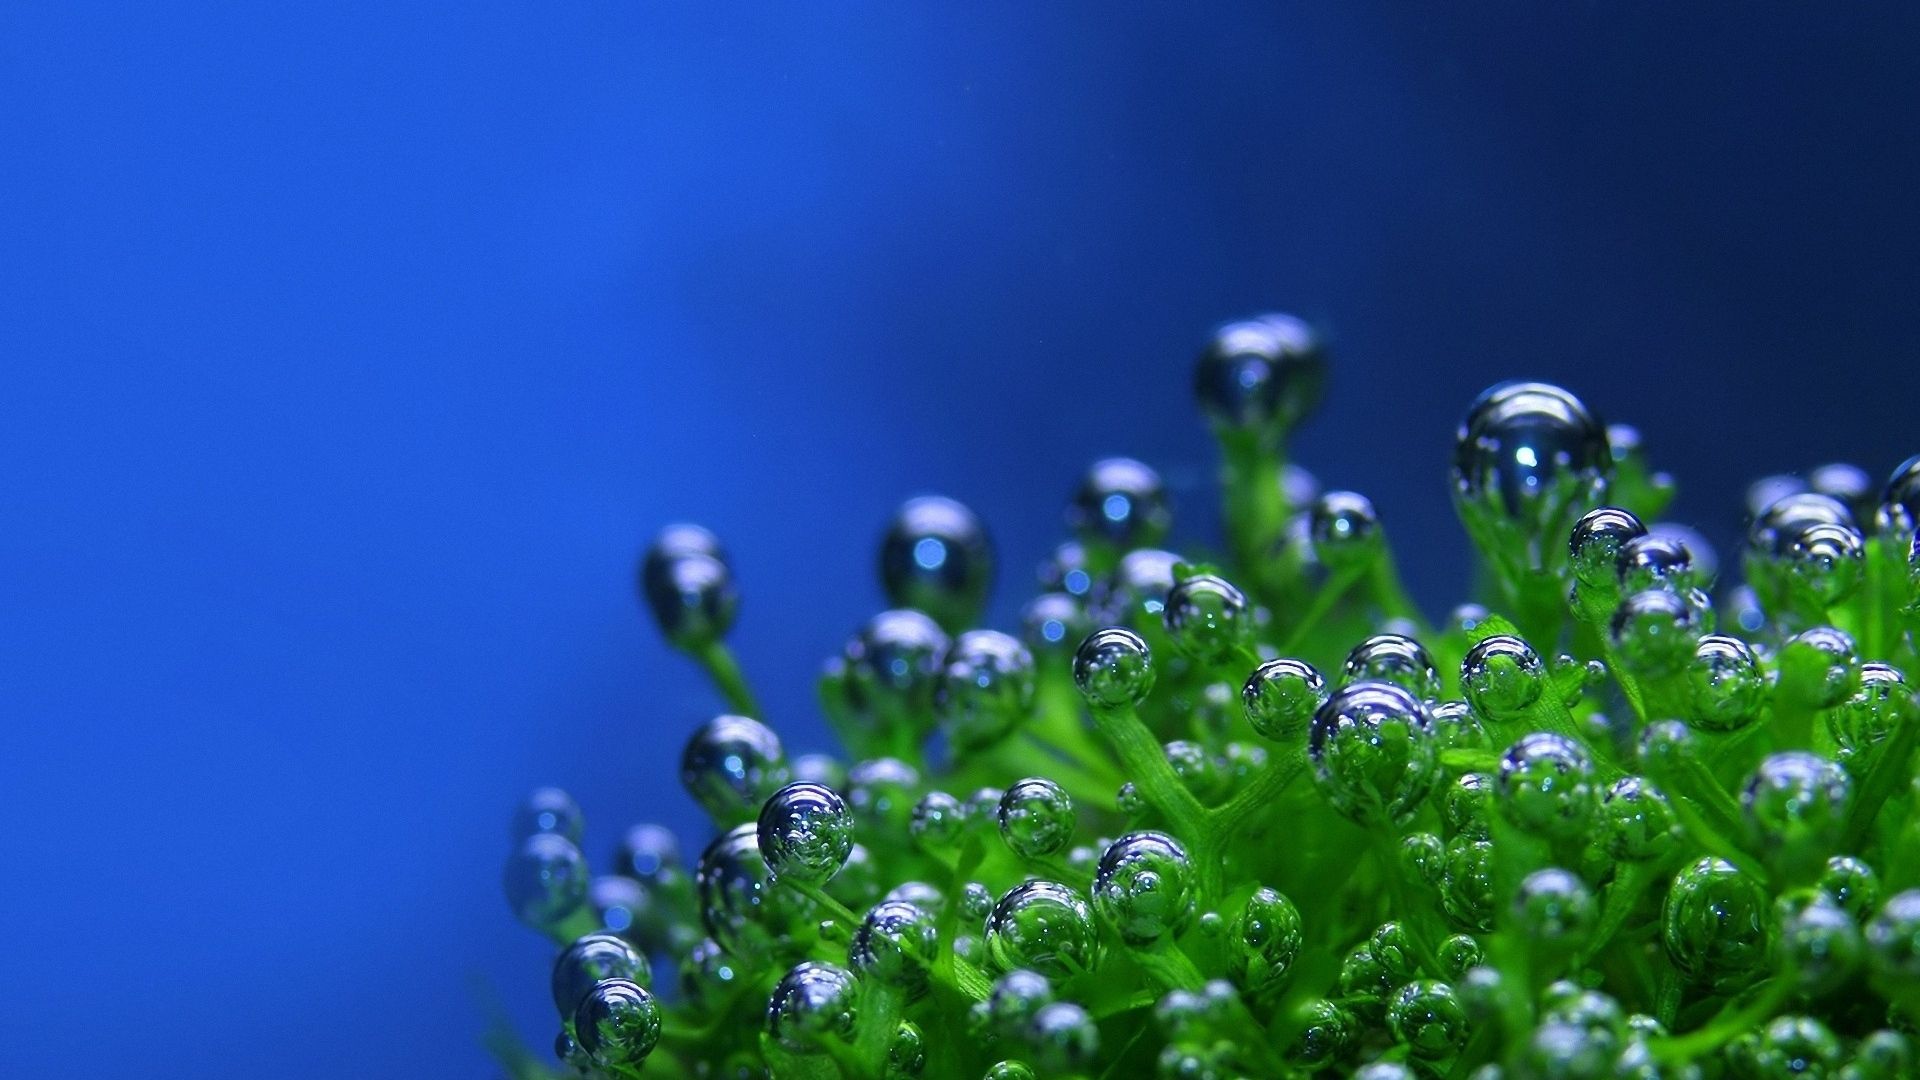 Download Wallpaper 1920x1080 green, drops, bubbles, plant, blue background Full HD 1080p HD Background